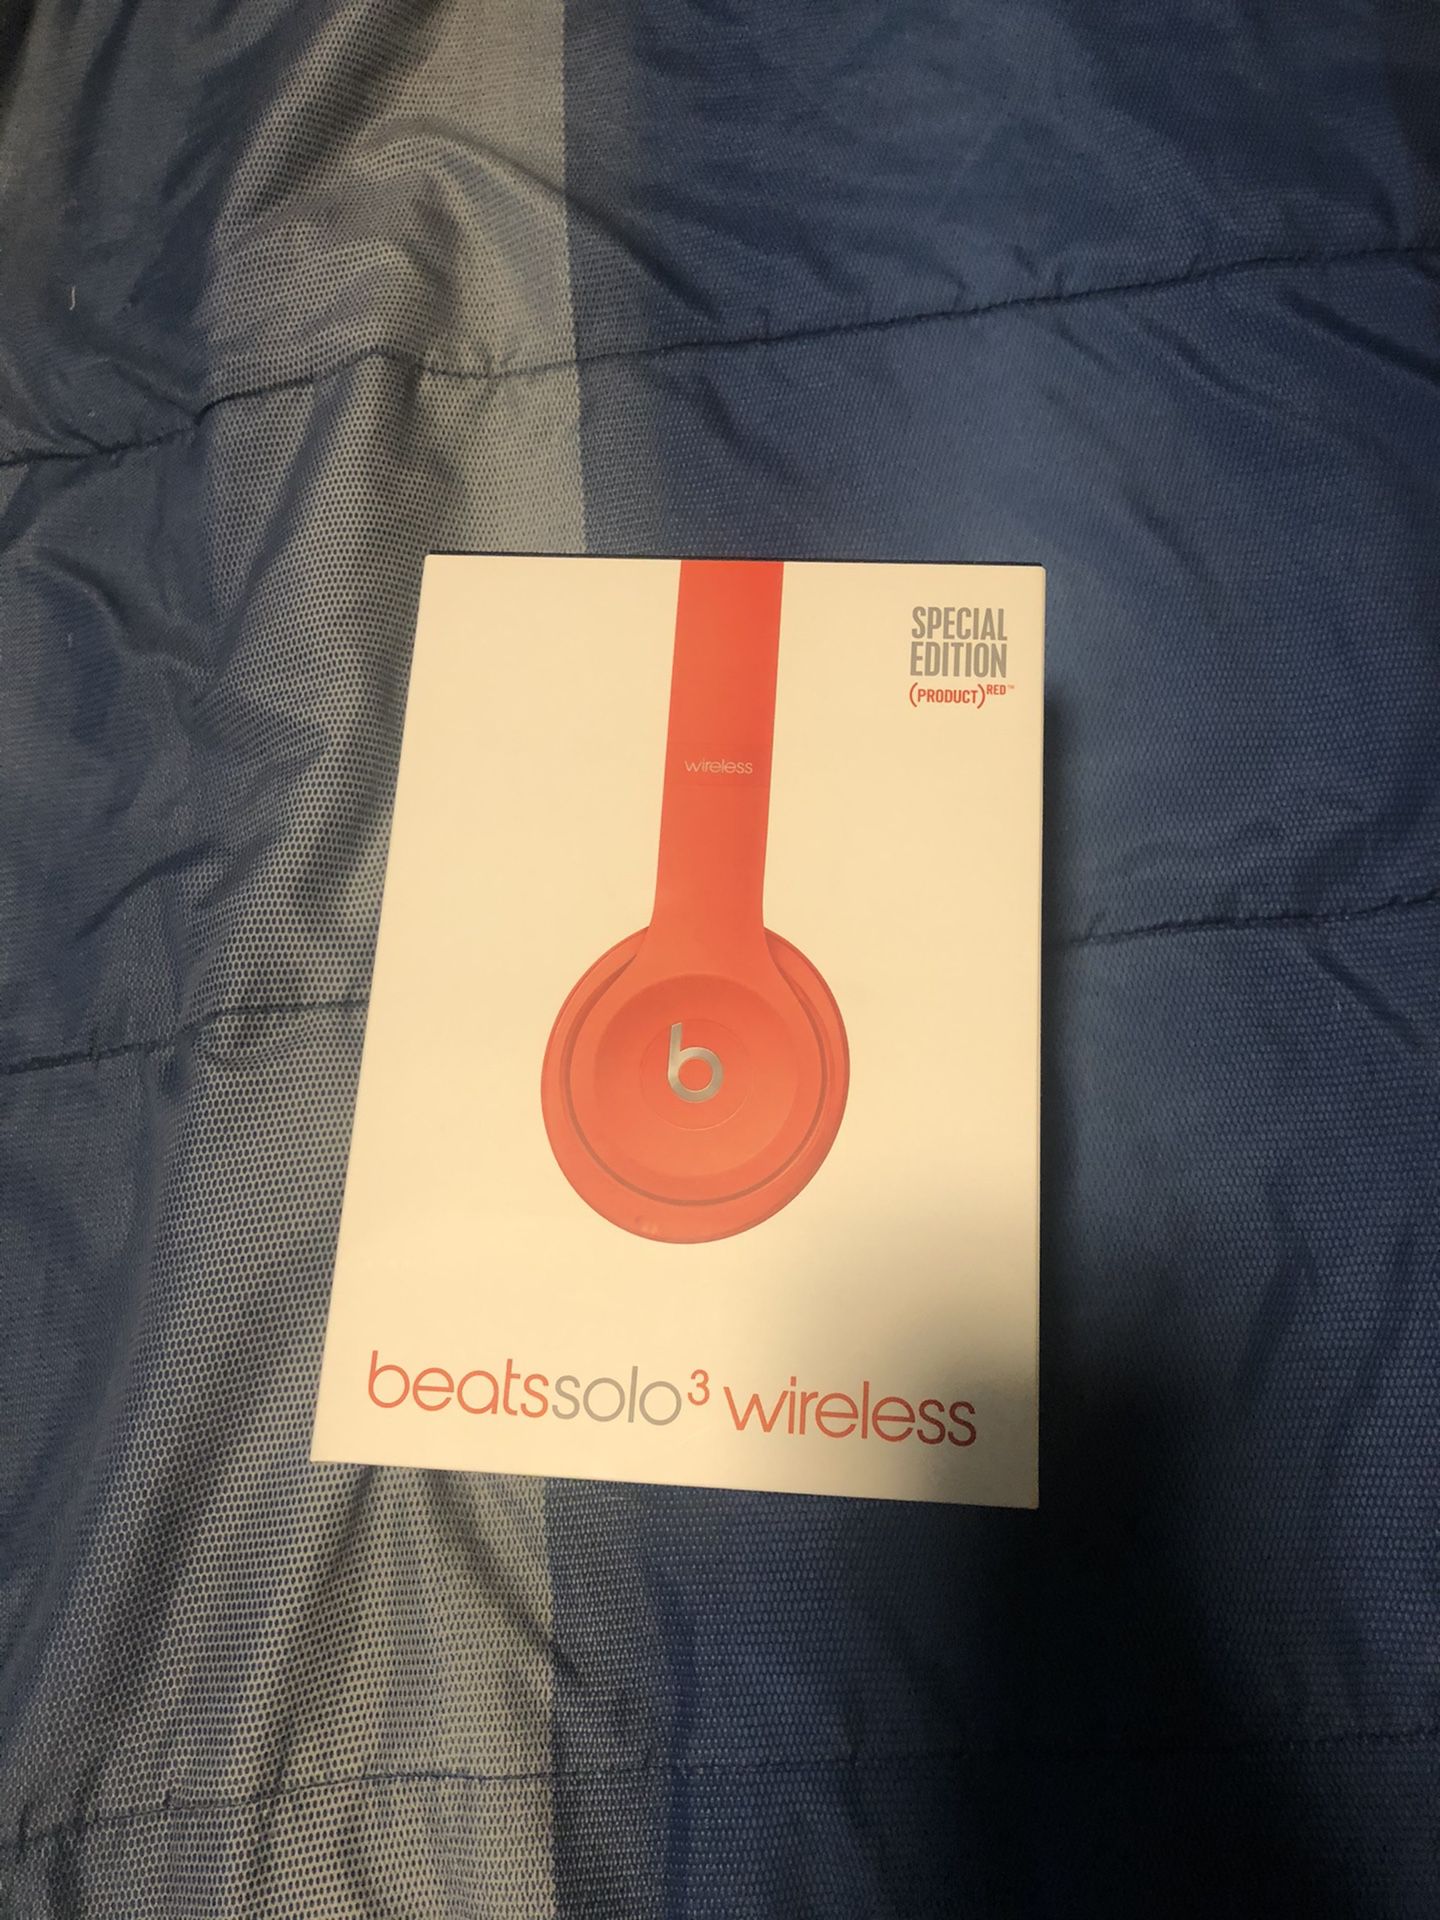 Beats solo wireless (red)